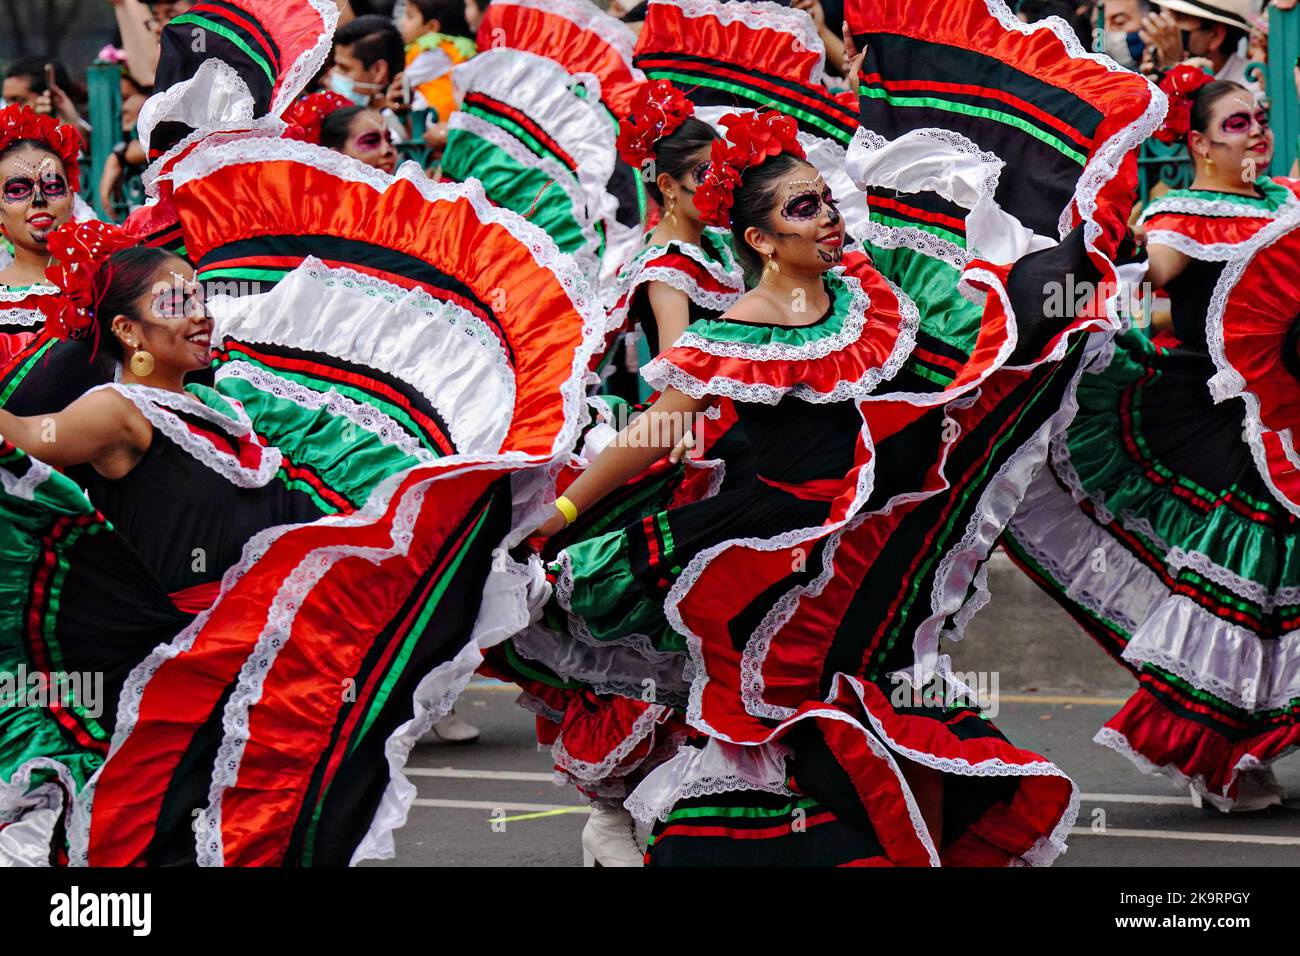 Mexico City, Mexico. 29th Oct, 2022. Traditional Mexican dancers perform in costumes during the Grand Parade of the Dead to celebrate Dia de los Muertos holiday on Paseo de la Reforma, October 29, 2022 in Mexico City, Mexico. Credit: Richard Ellis/Richard Ellis/Alamy Live News Stock Photo